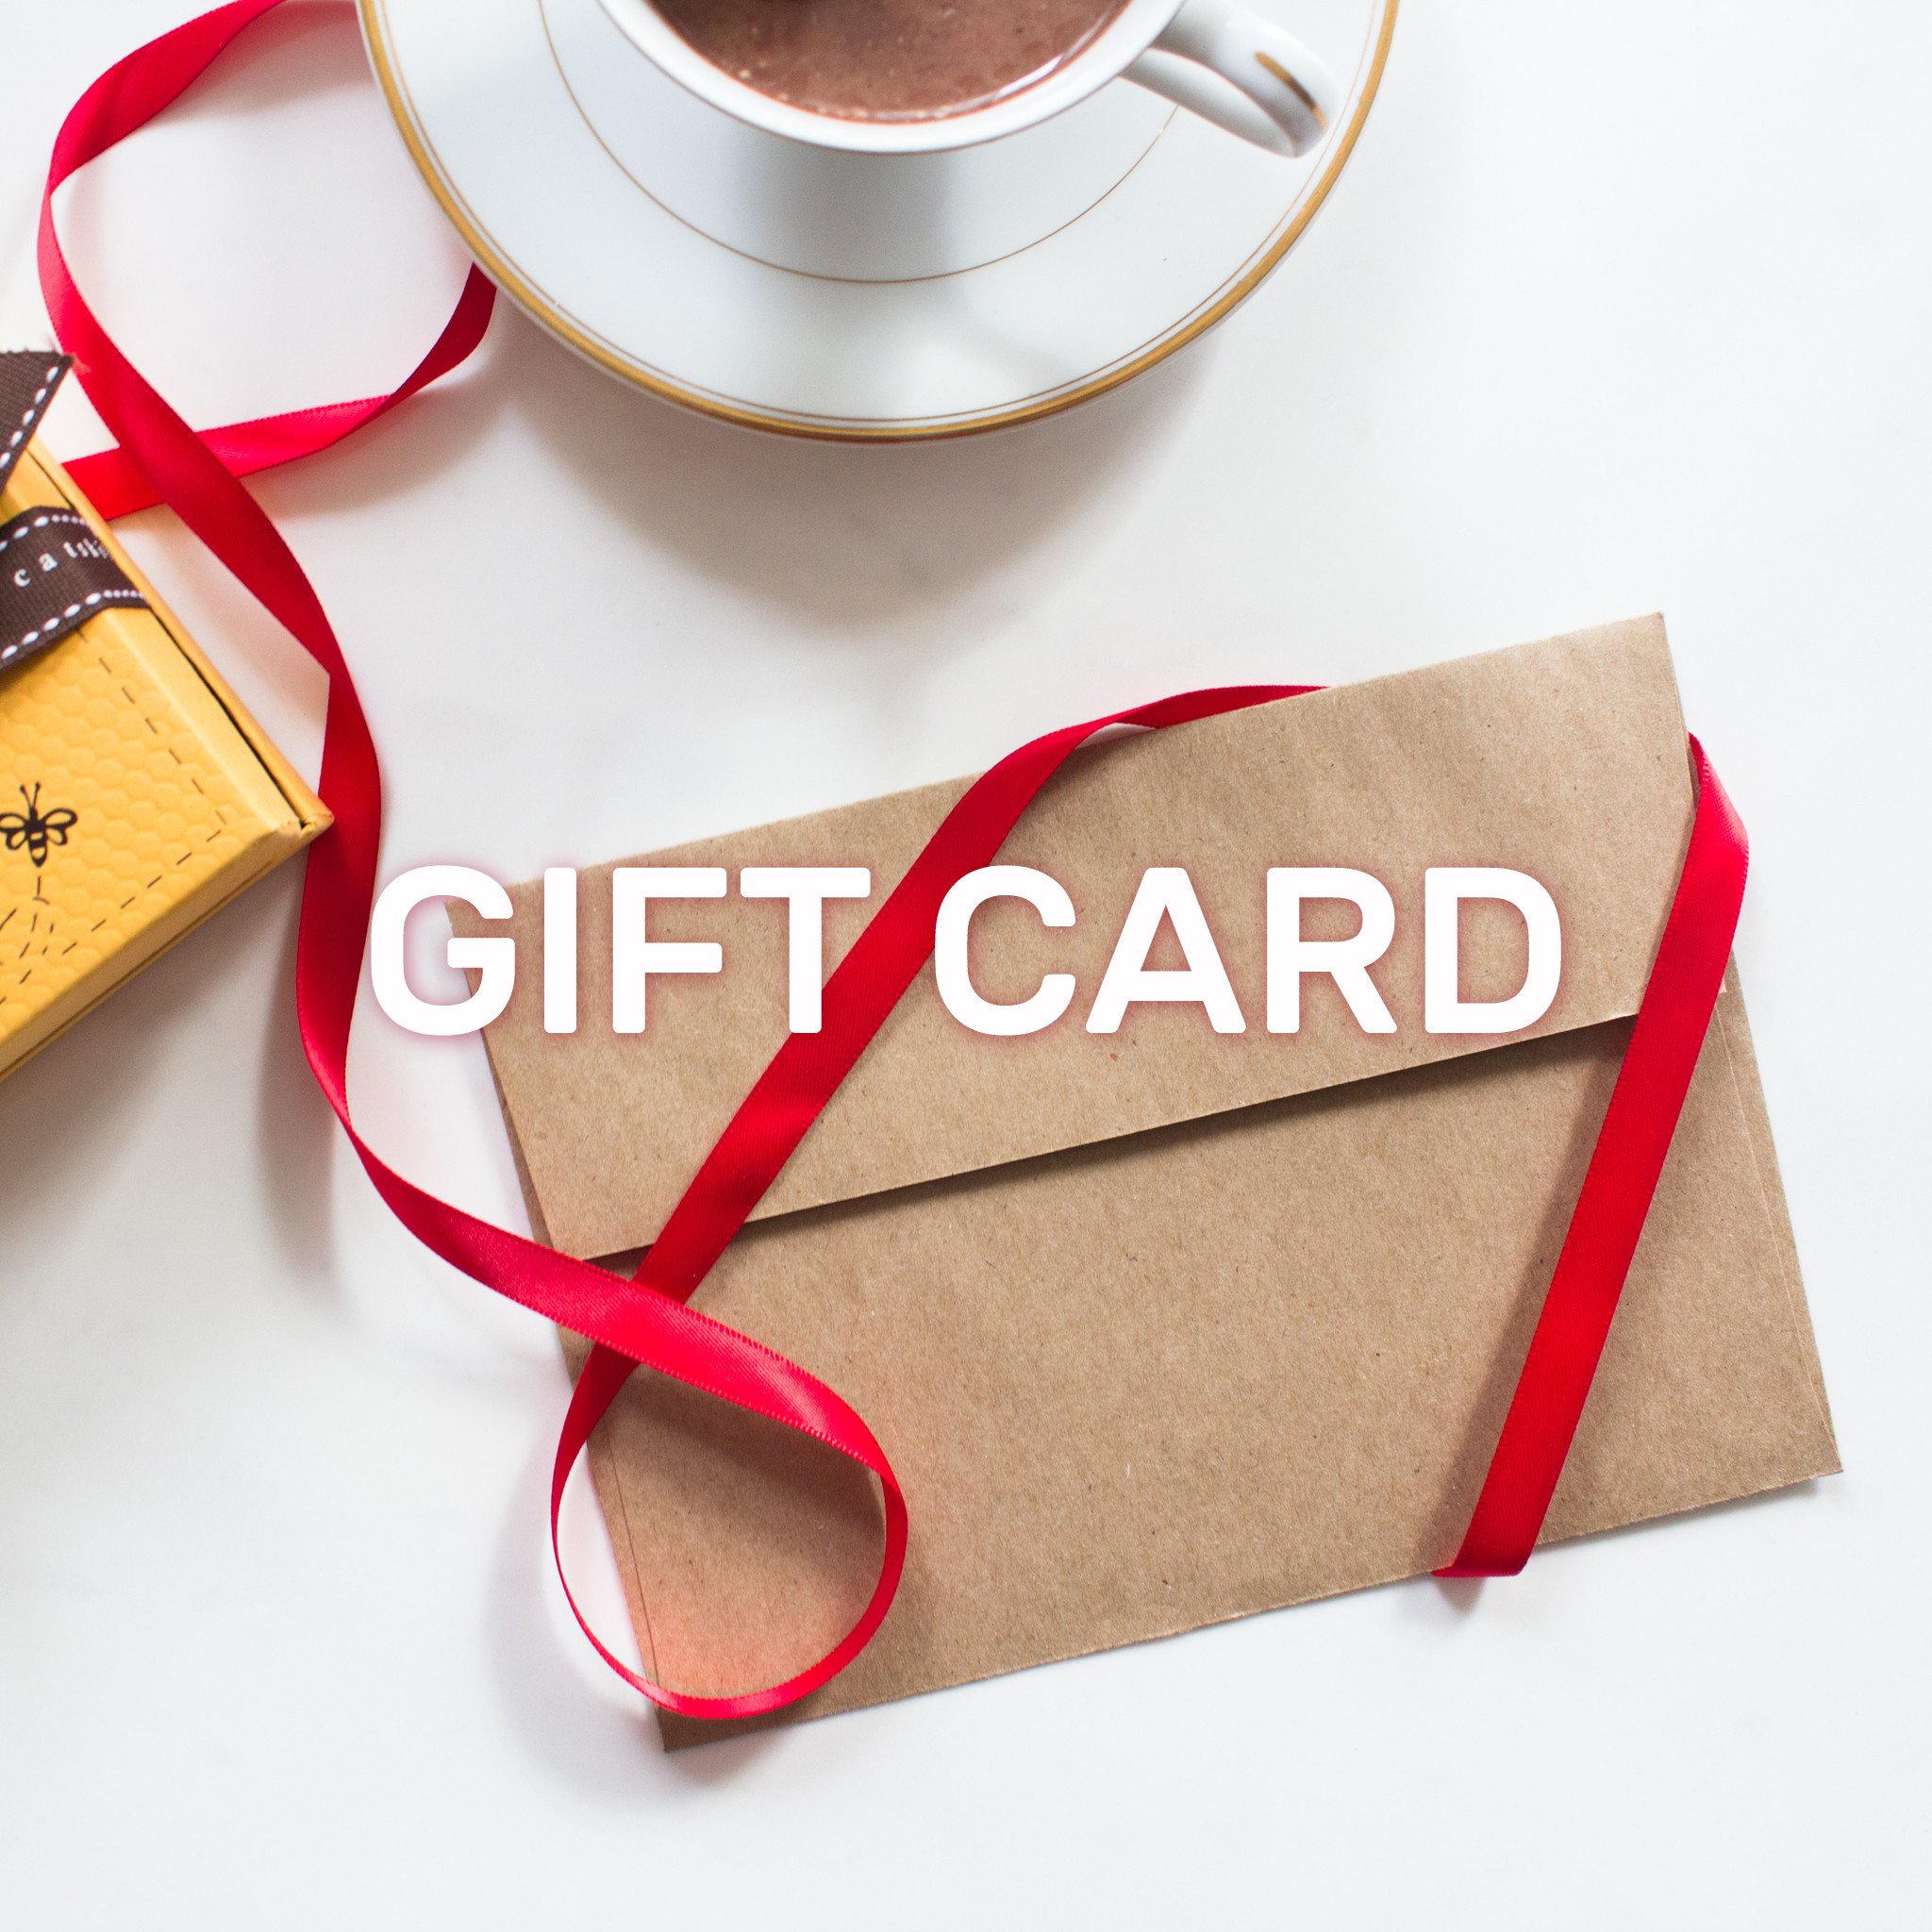 E-Gift Card | Farm To People | Small-Batch, Artisanal Food and Gift ...